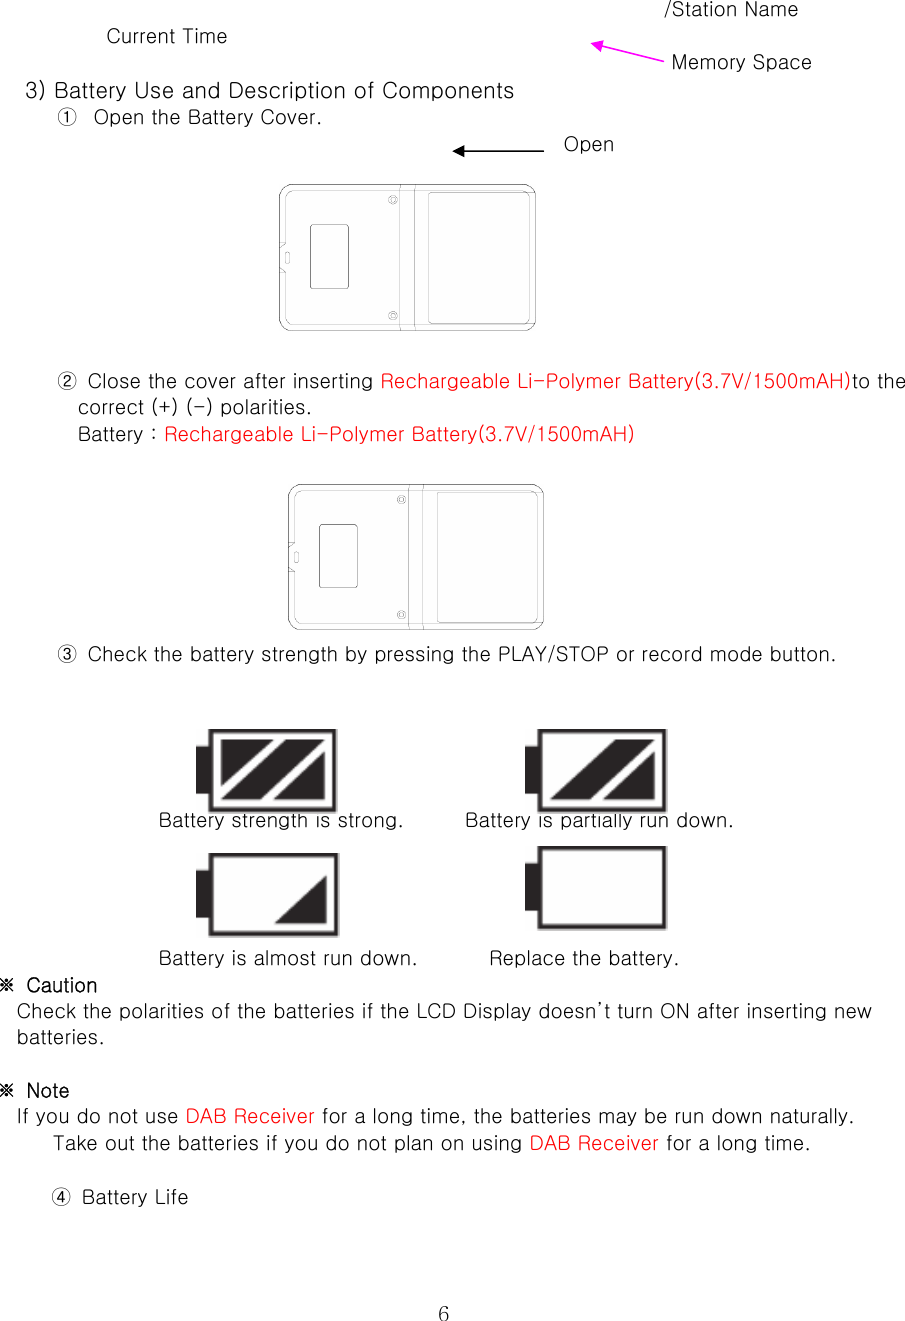  6                                                               /Station Name         Current Time                                                            Memory Space  3) Battery Use and Description of Components   ① Open the Battery Cover.                                                           Open         ②  Close the cover after inserting Rechargeable Li-Polymer Battery(3.7V/1500mAH)to the correct (+) (-) polarities.   Battery : Rechargeable Li-Polymer Battery(3.7V/1500mAH)        ③  Check the battery strength by pressing the PLAY/STOP or record mode button.        Battery strength is strong.      Battery is partially run down.      Battery is almost run down.              Replace the battery.   ※  Caution   Check the polarities of the batteries if the LCD Display doesn’t turn ON after inserting new batteries.    ※  Note   If you do not use DAB Receiver for a long time, the batteries may be run down naturally.   Take out the batteries if you do not plan on using DAB Receiver for a long time.    ④  Battery Life   